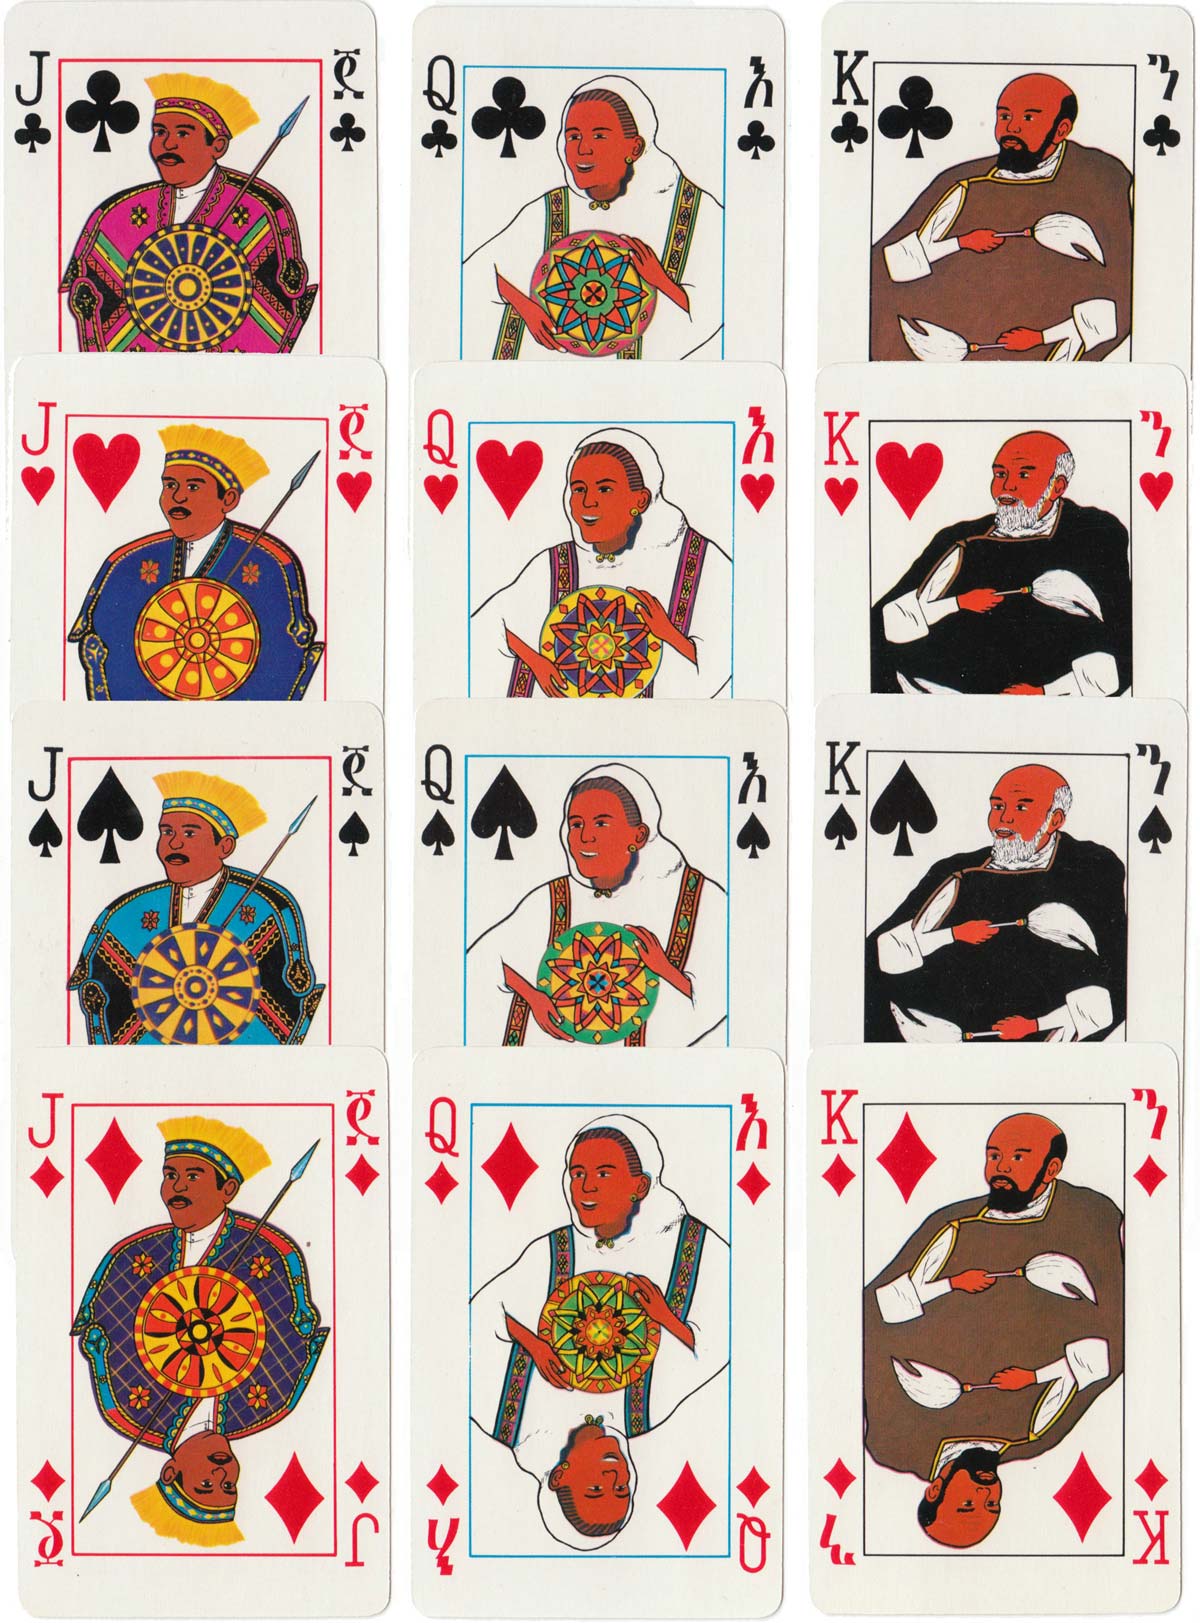 Ethiopian Air Lines playing cards designed by Melles Habtezghi, c.1969